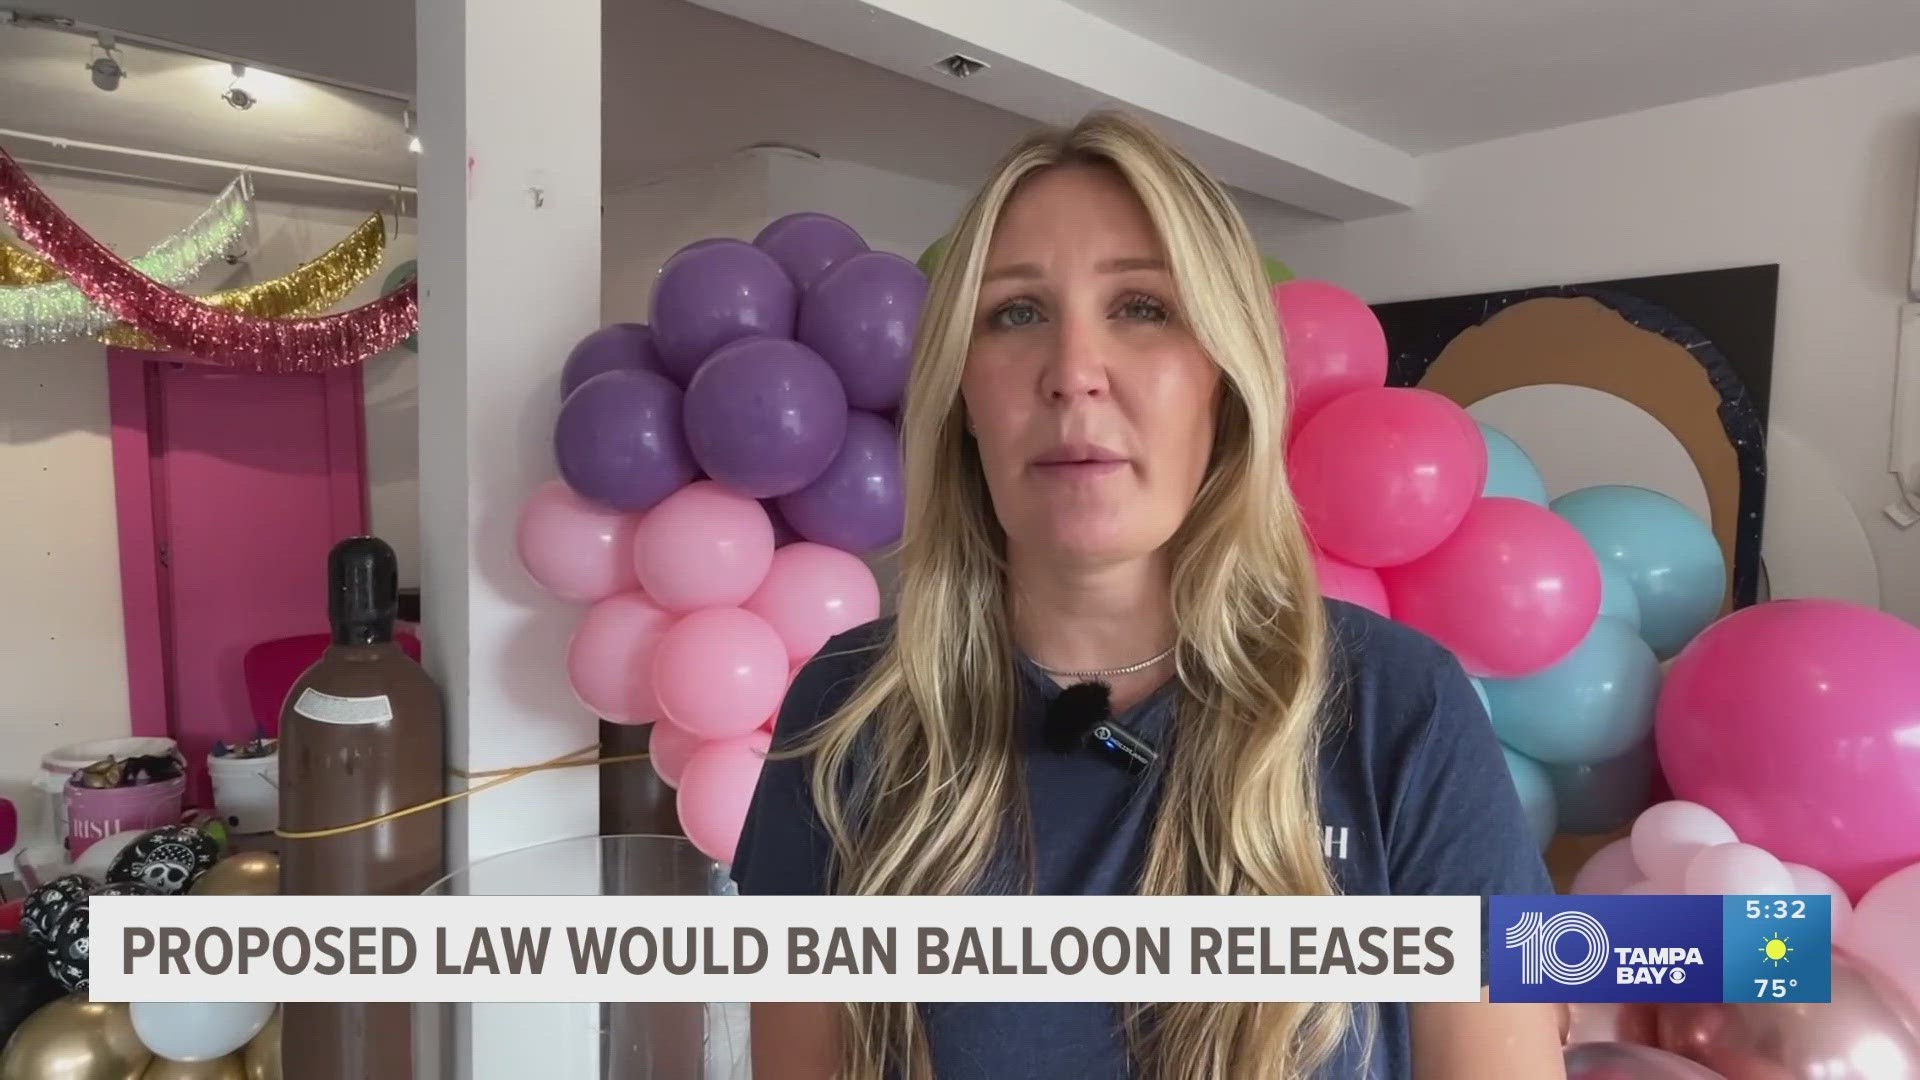 Those behind the proposal say balloons pose a threat to animals and marine life.